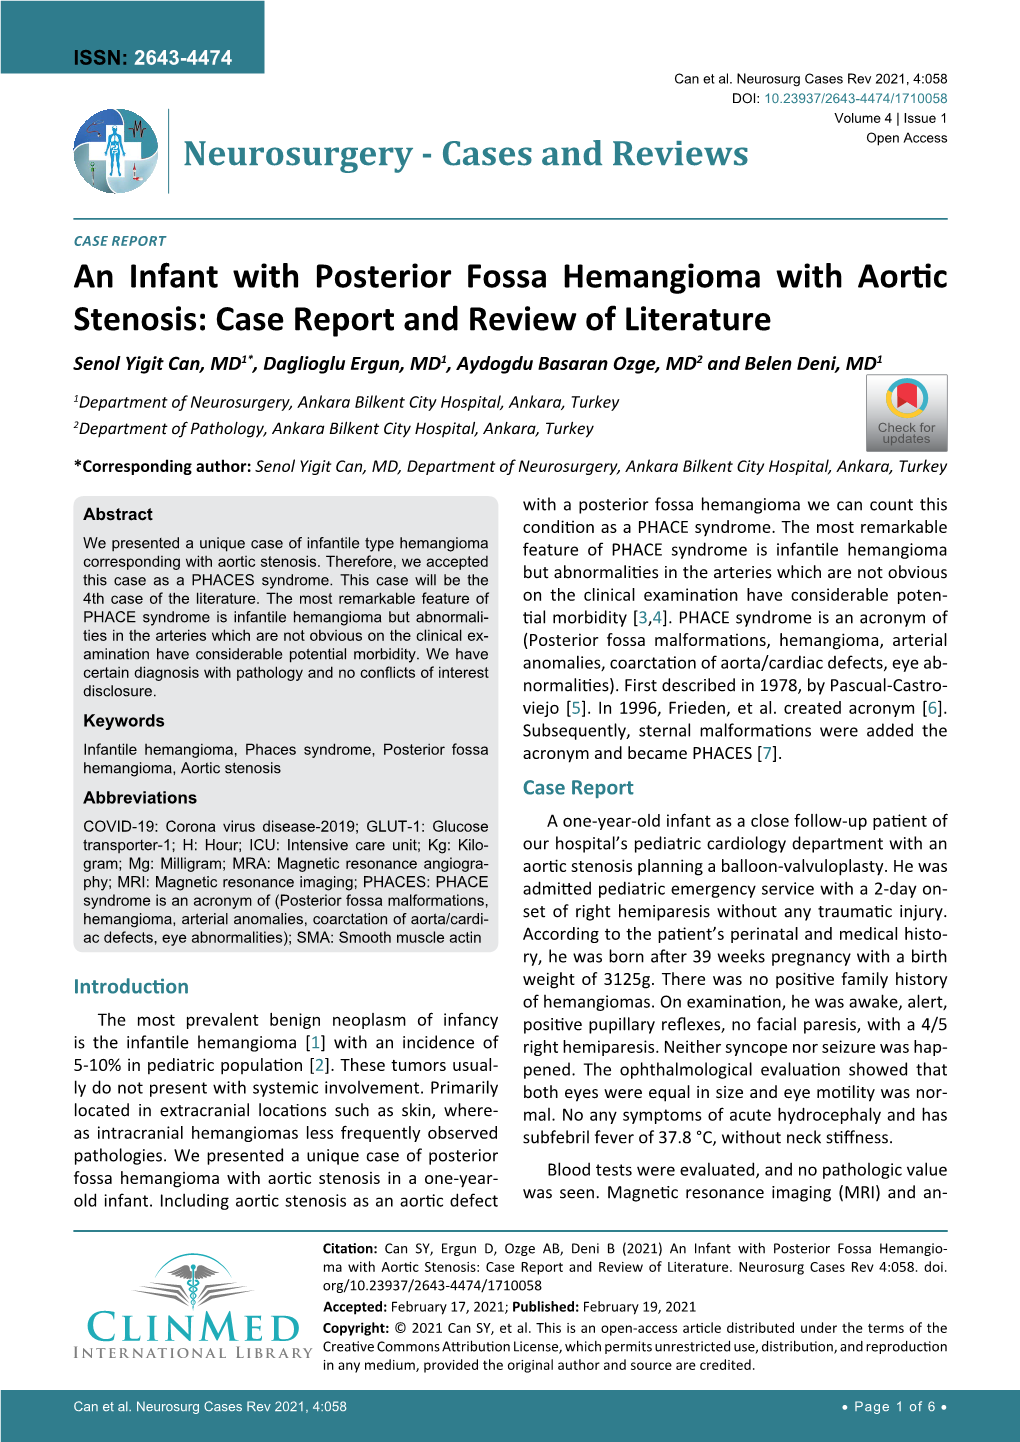 An Infant with Posterior Fossa Hemangioma with Aortic Stenosis: Case Report and Review of Literature